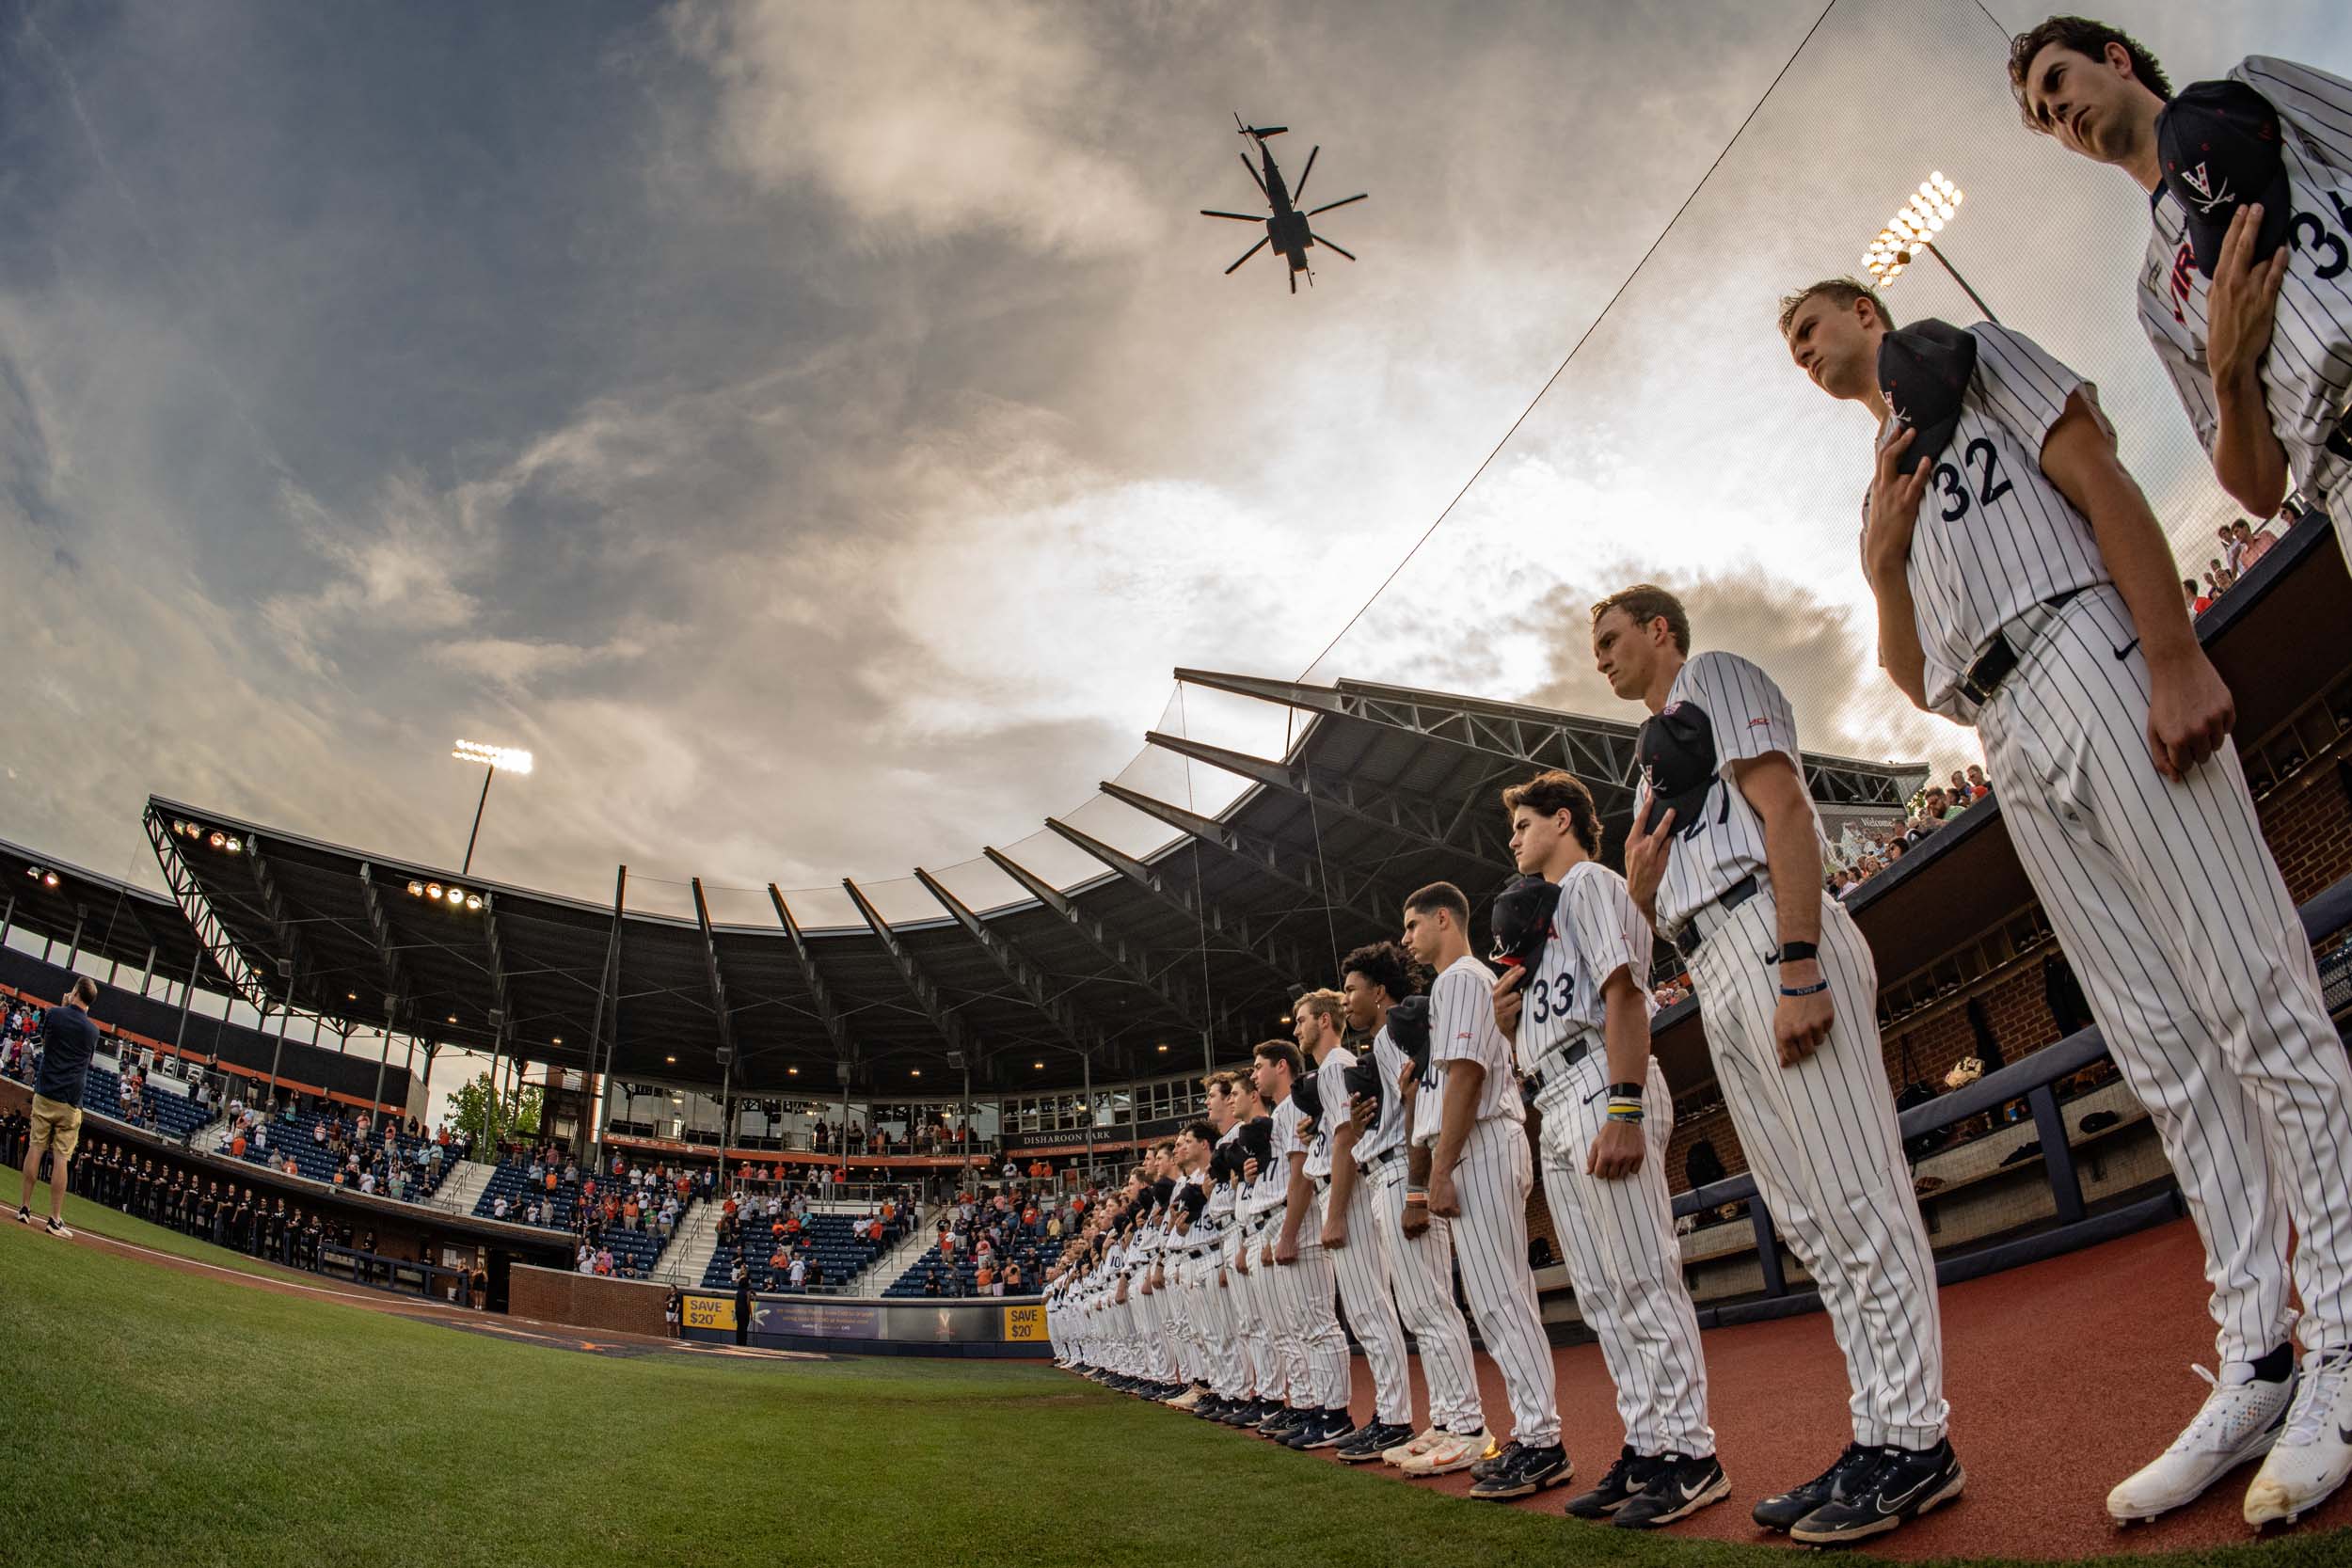 A fisheye look up at the U V A baseball team as they stand lined up for the national anthem and a heliocopter flys over